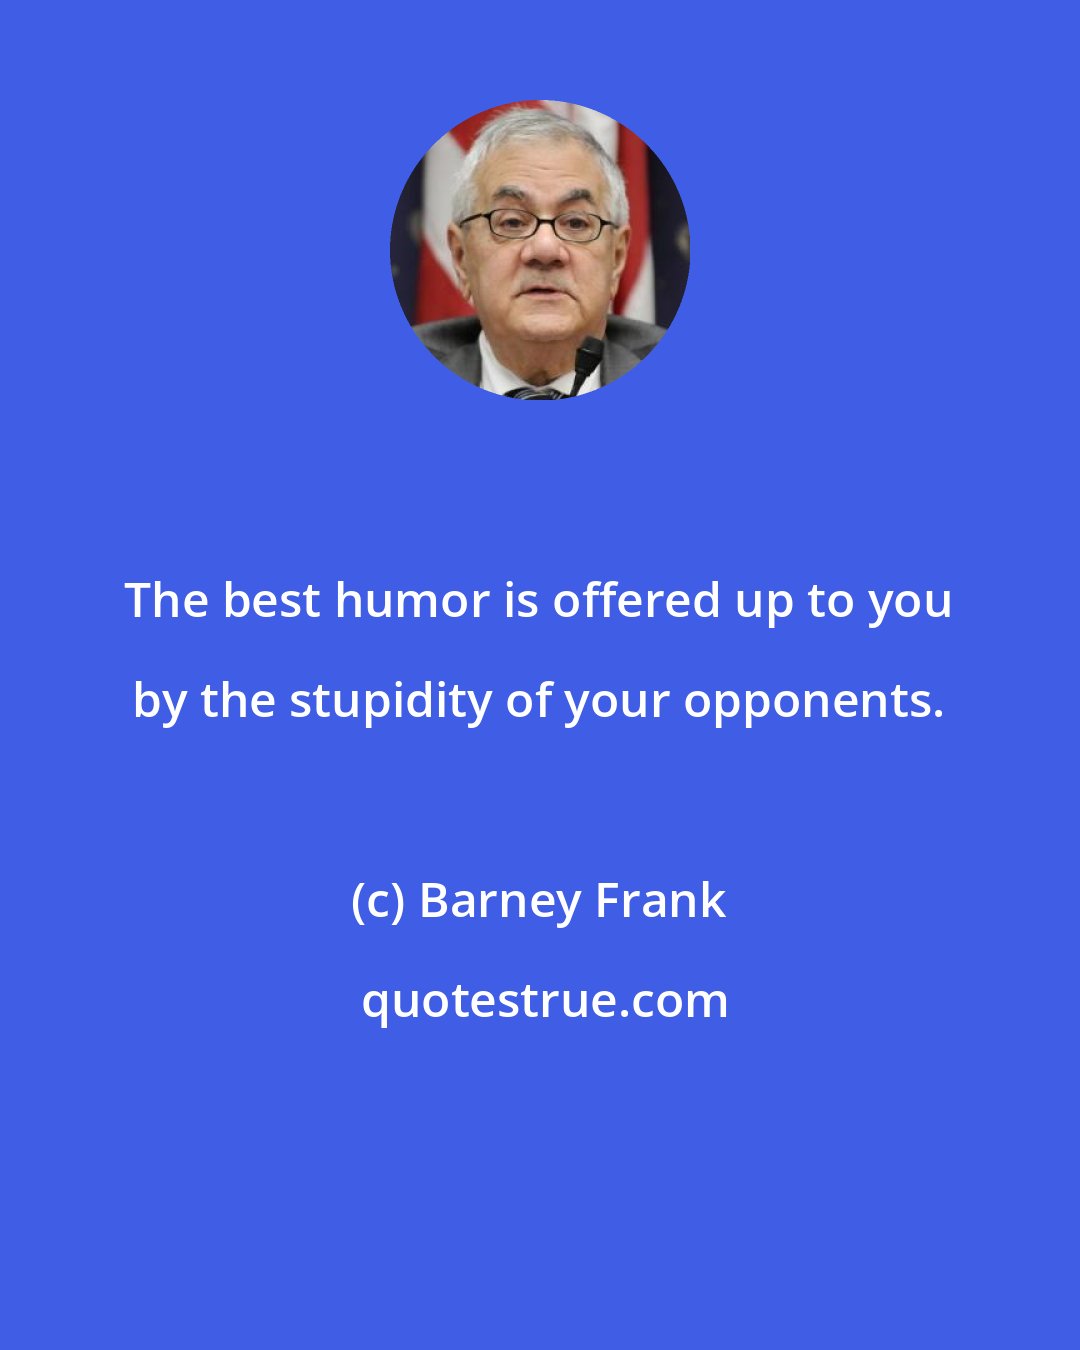 Barney Frank: The best humor is offered up to you by the stupidity of your opponents.